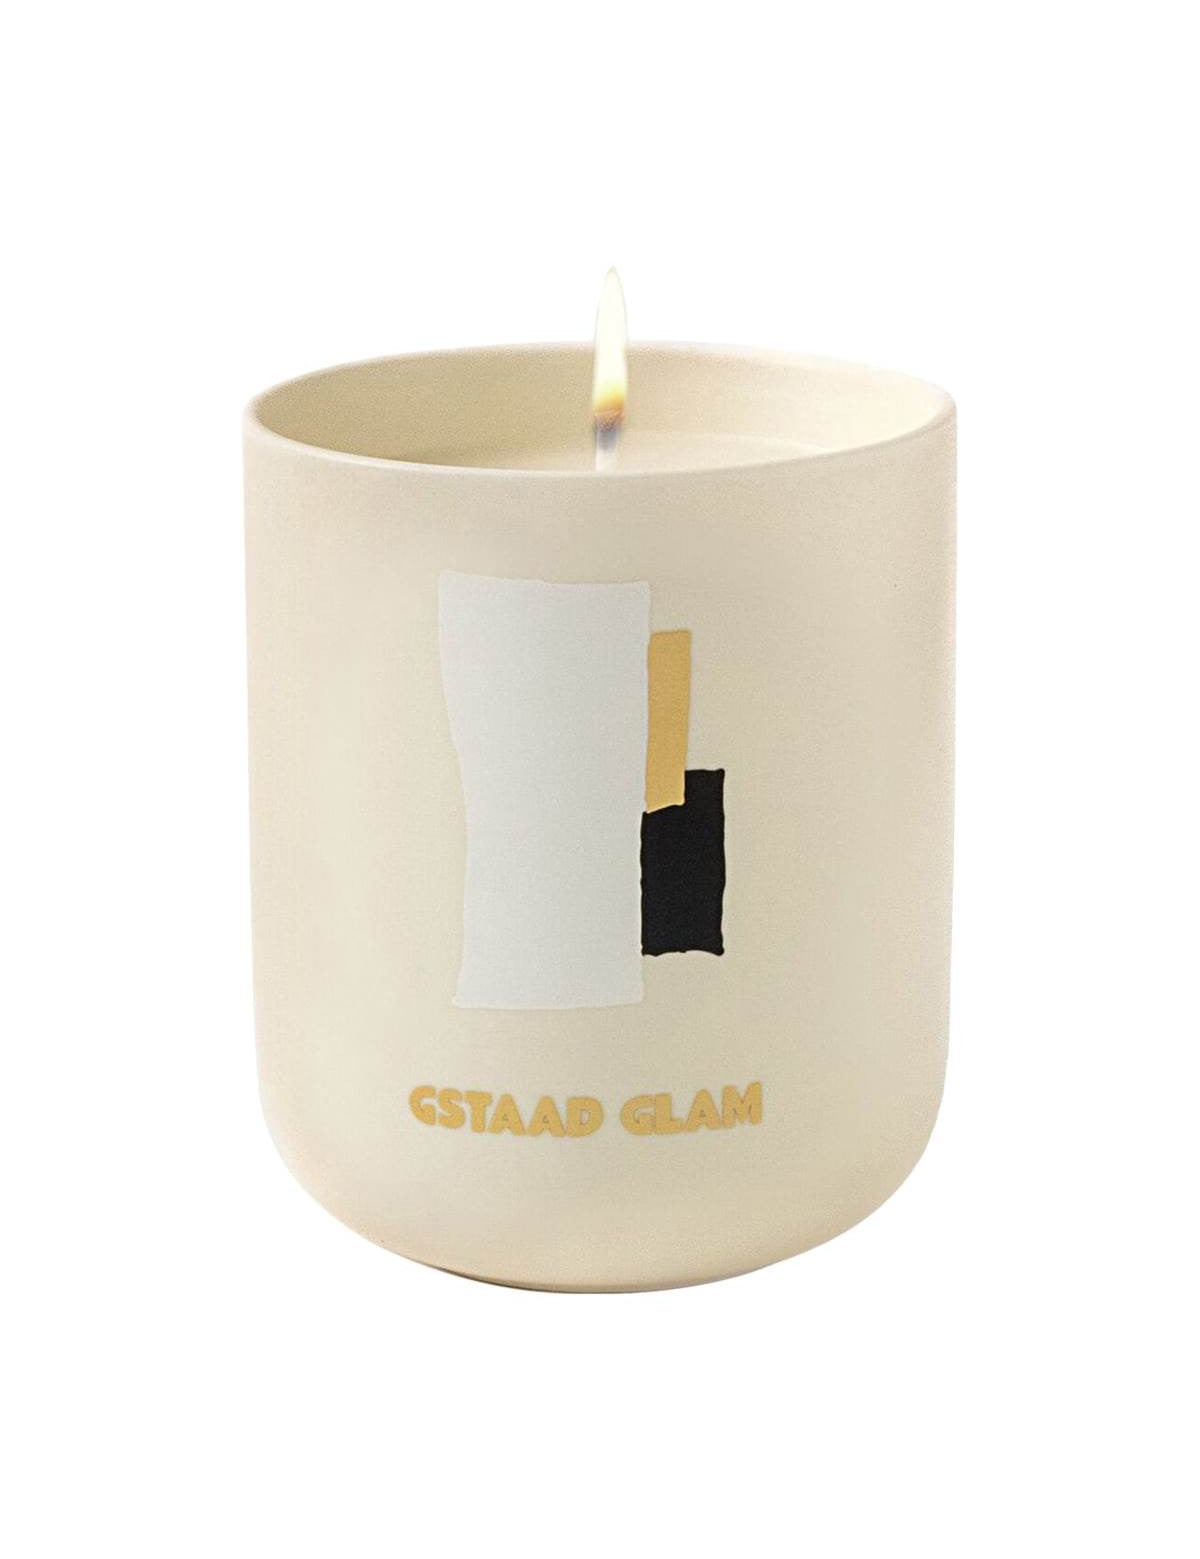 assouline-gstaad-glam-scented-candle.jpg